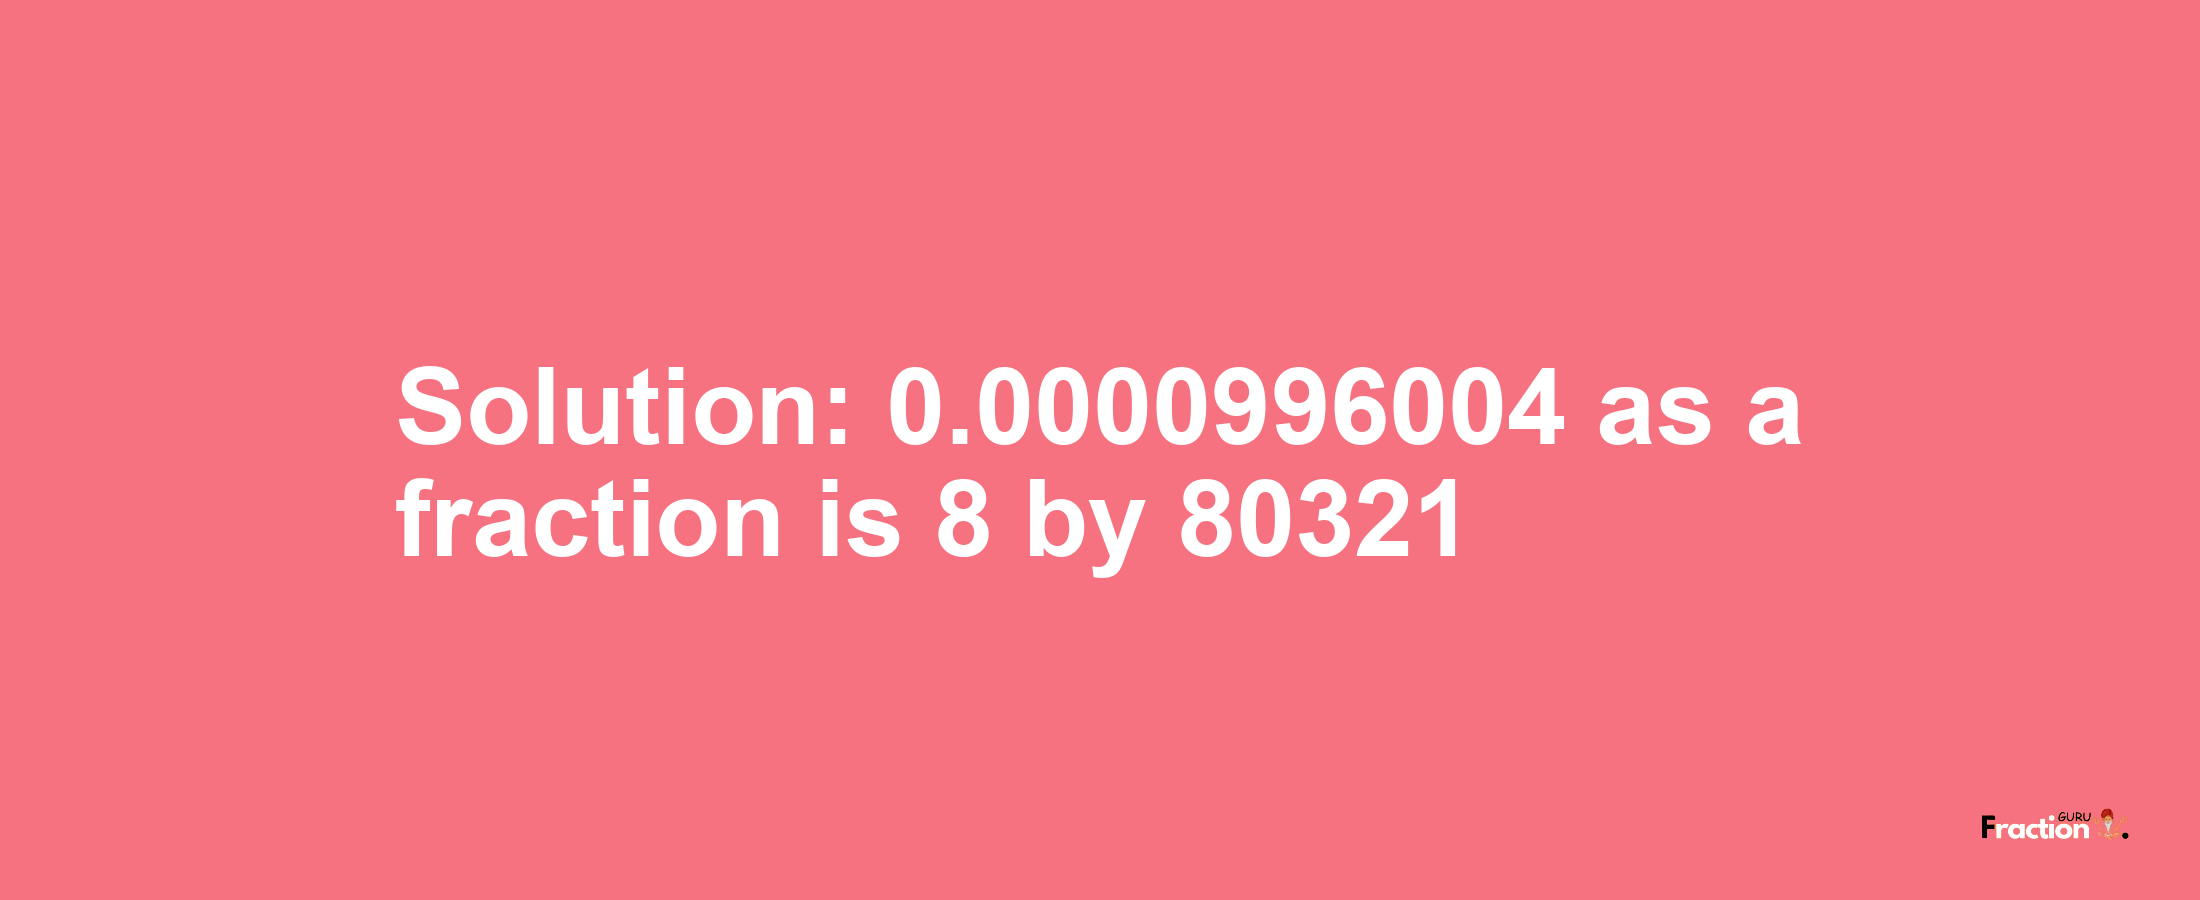 Solution:0.0000996004 as a fraction is 8/80321